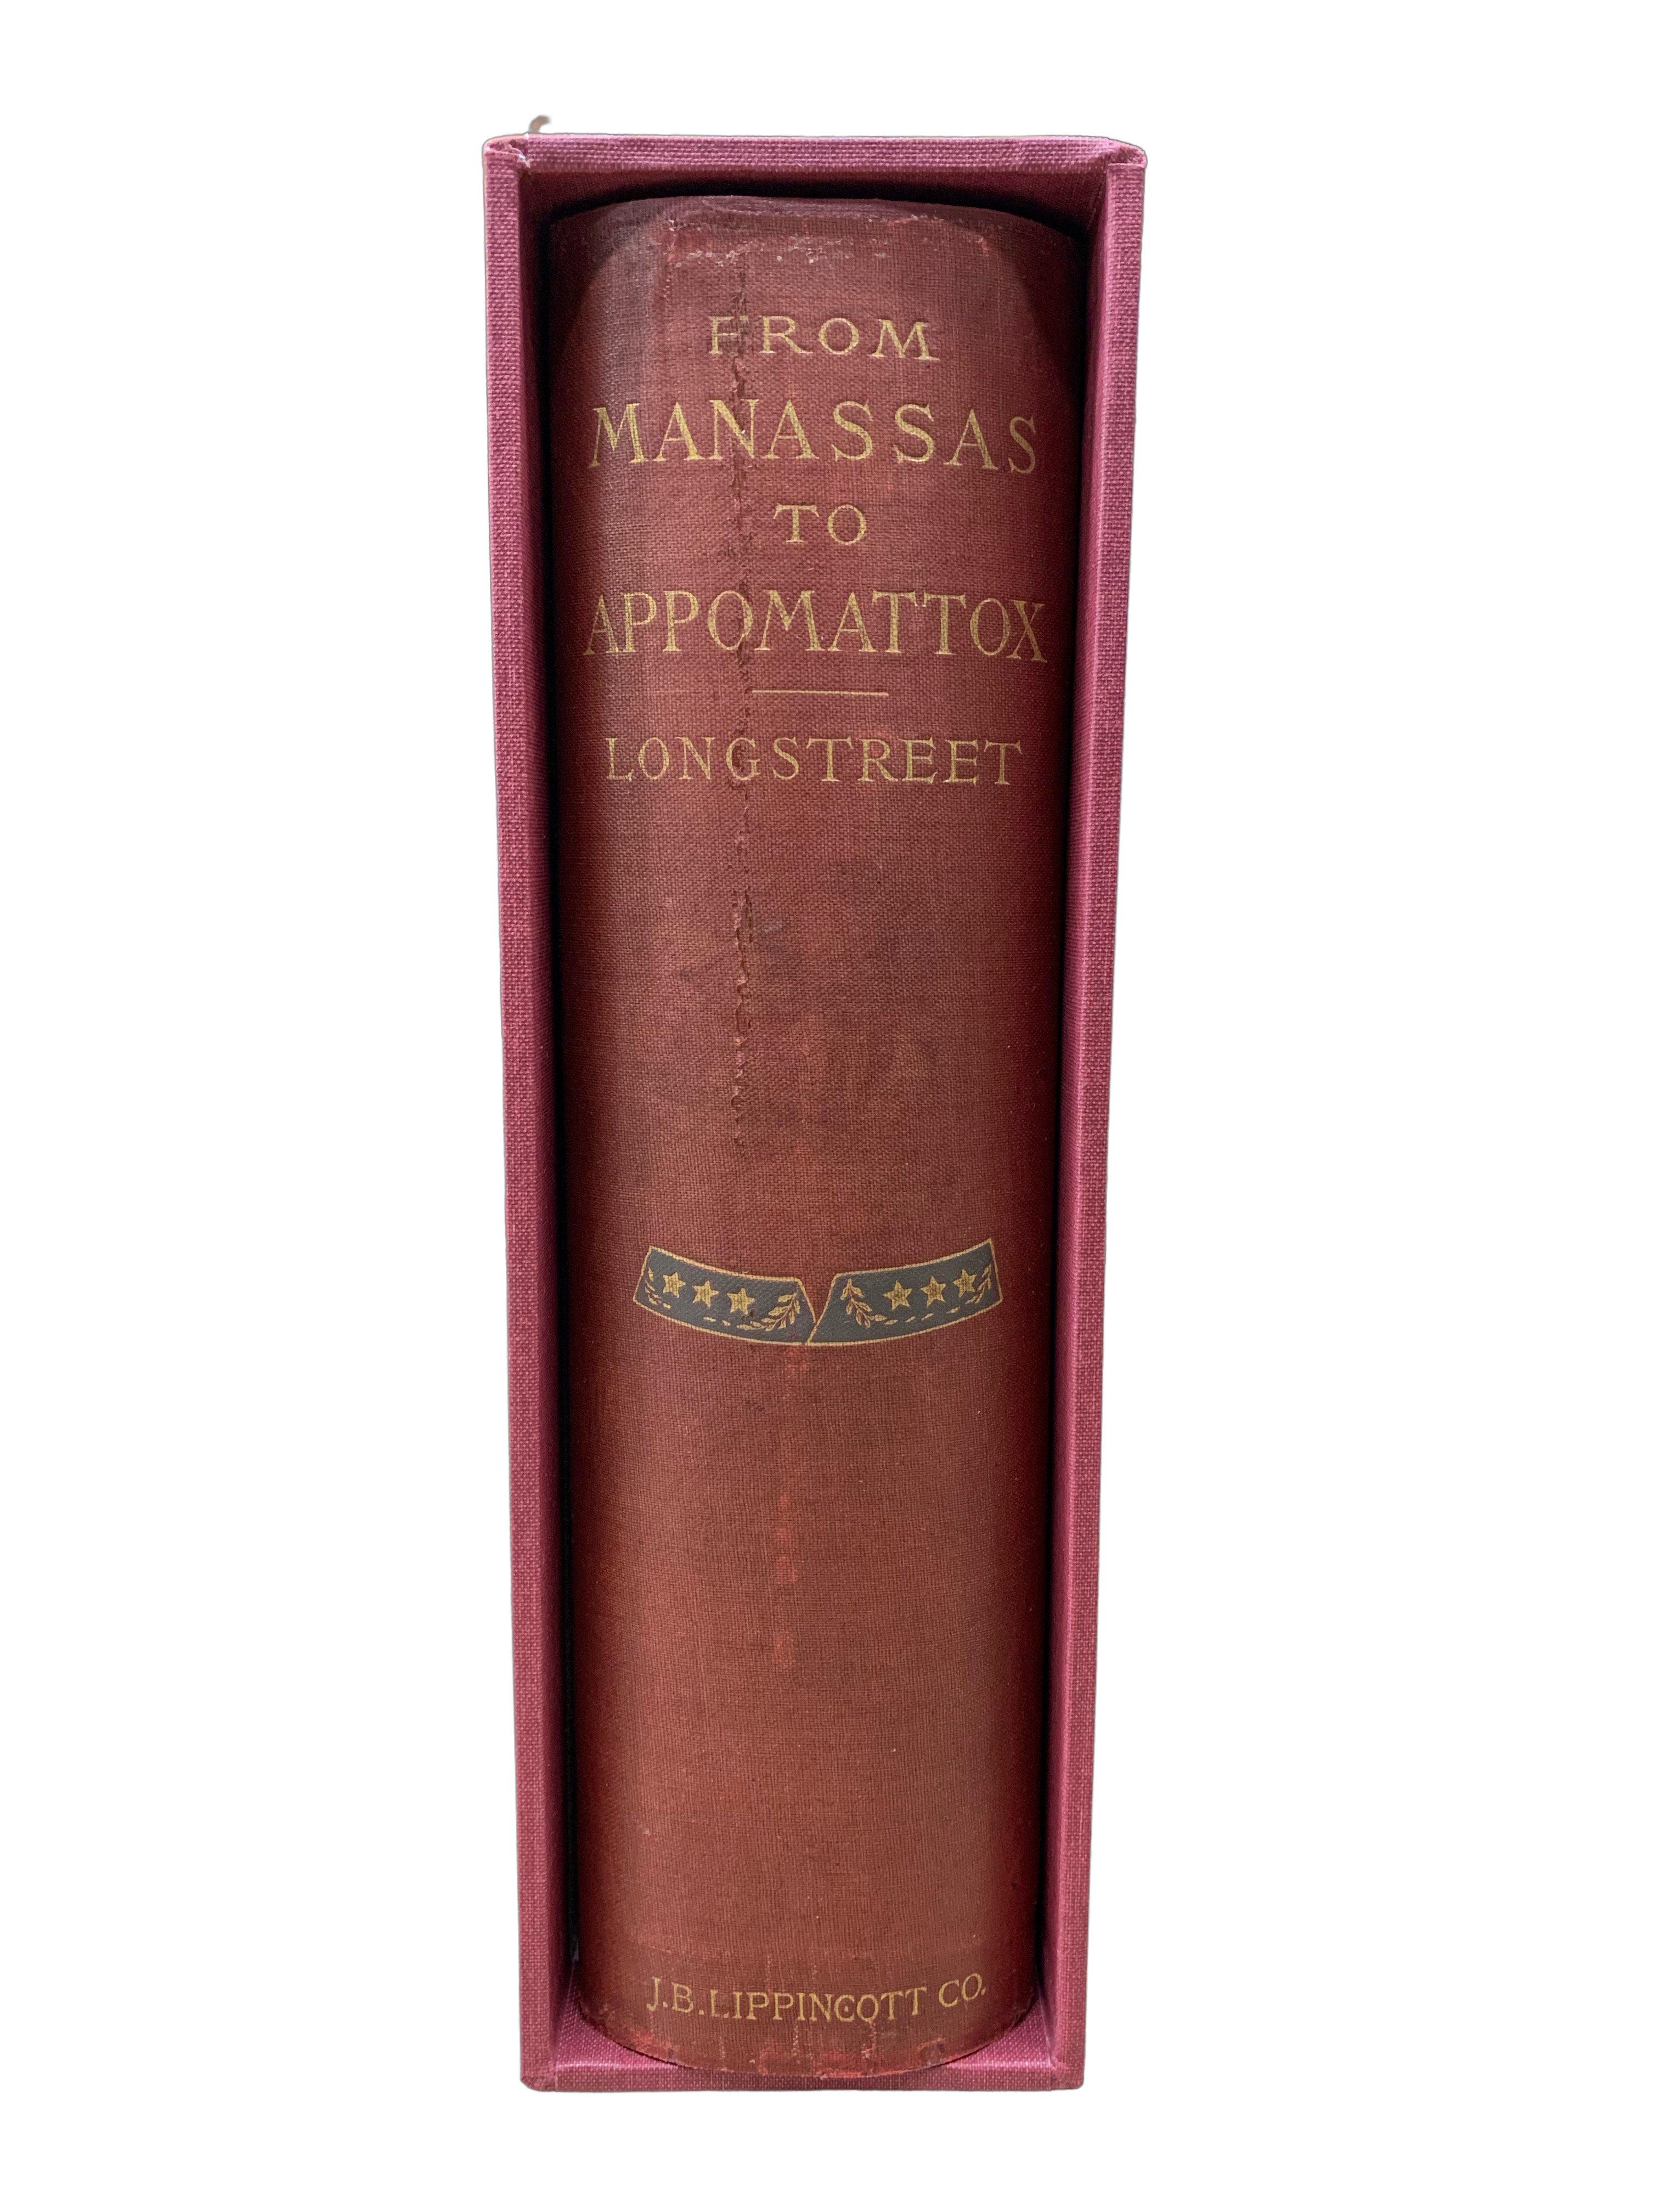 From Manassas to Appomattox, by James Longstreet, First Edition, Signed 1